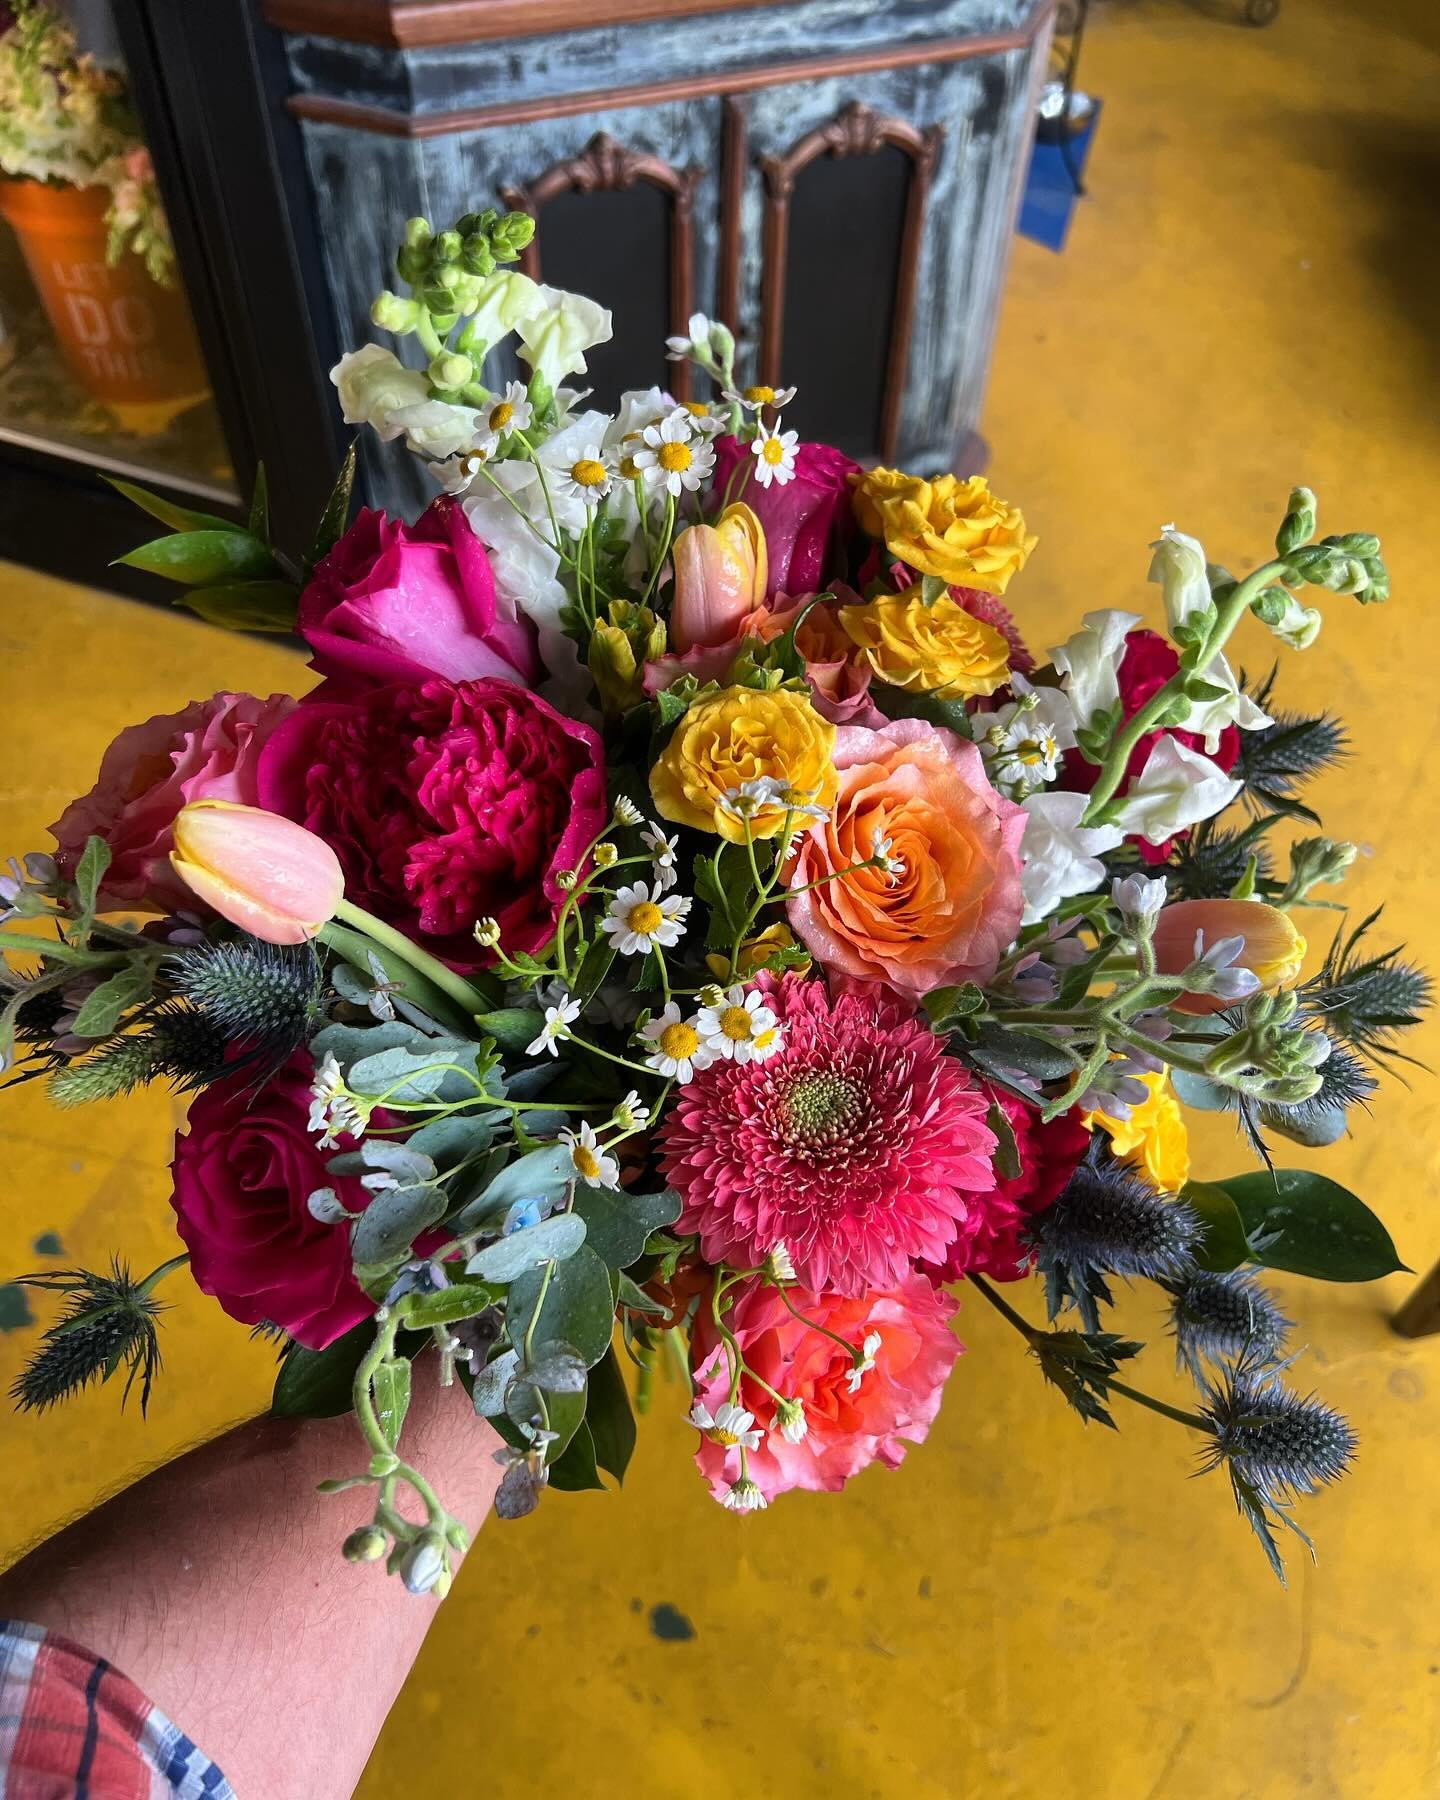 This weekend&rsquo;s Bridal bouquet. Featuring hydrangeas, free spirit roses, hot pink peonies, hot topaz roses, blue thistle, peach tulips, yellow spray roses, snapdragons #arborhousefloral #neworleansweddings #brightbridalbouquet #floristnearme #ne